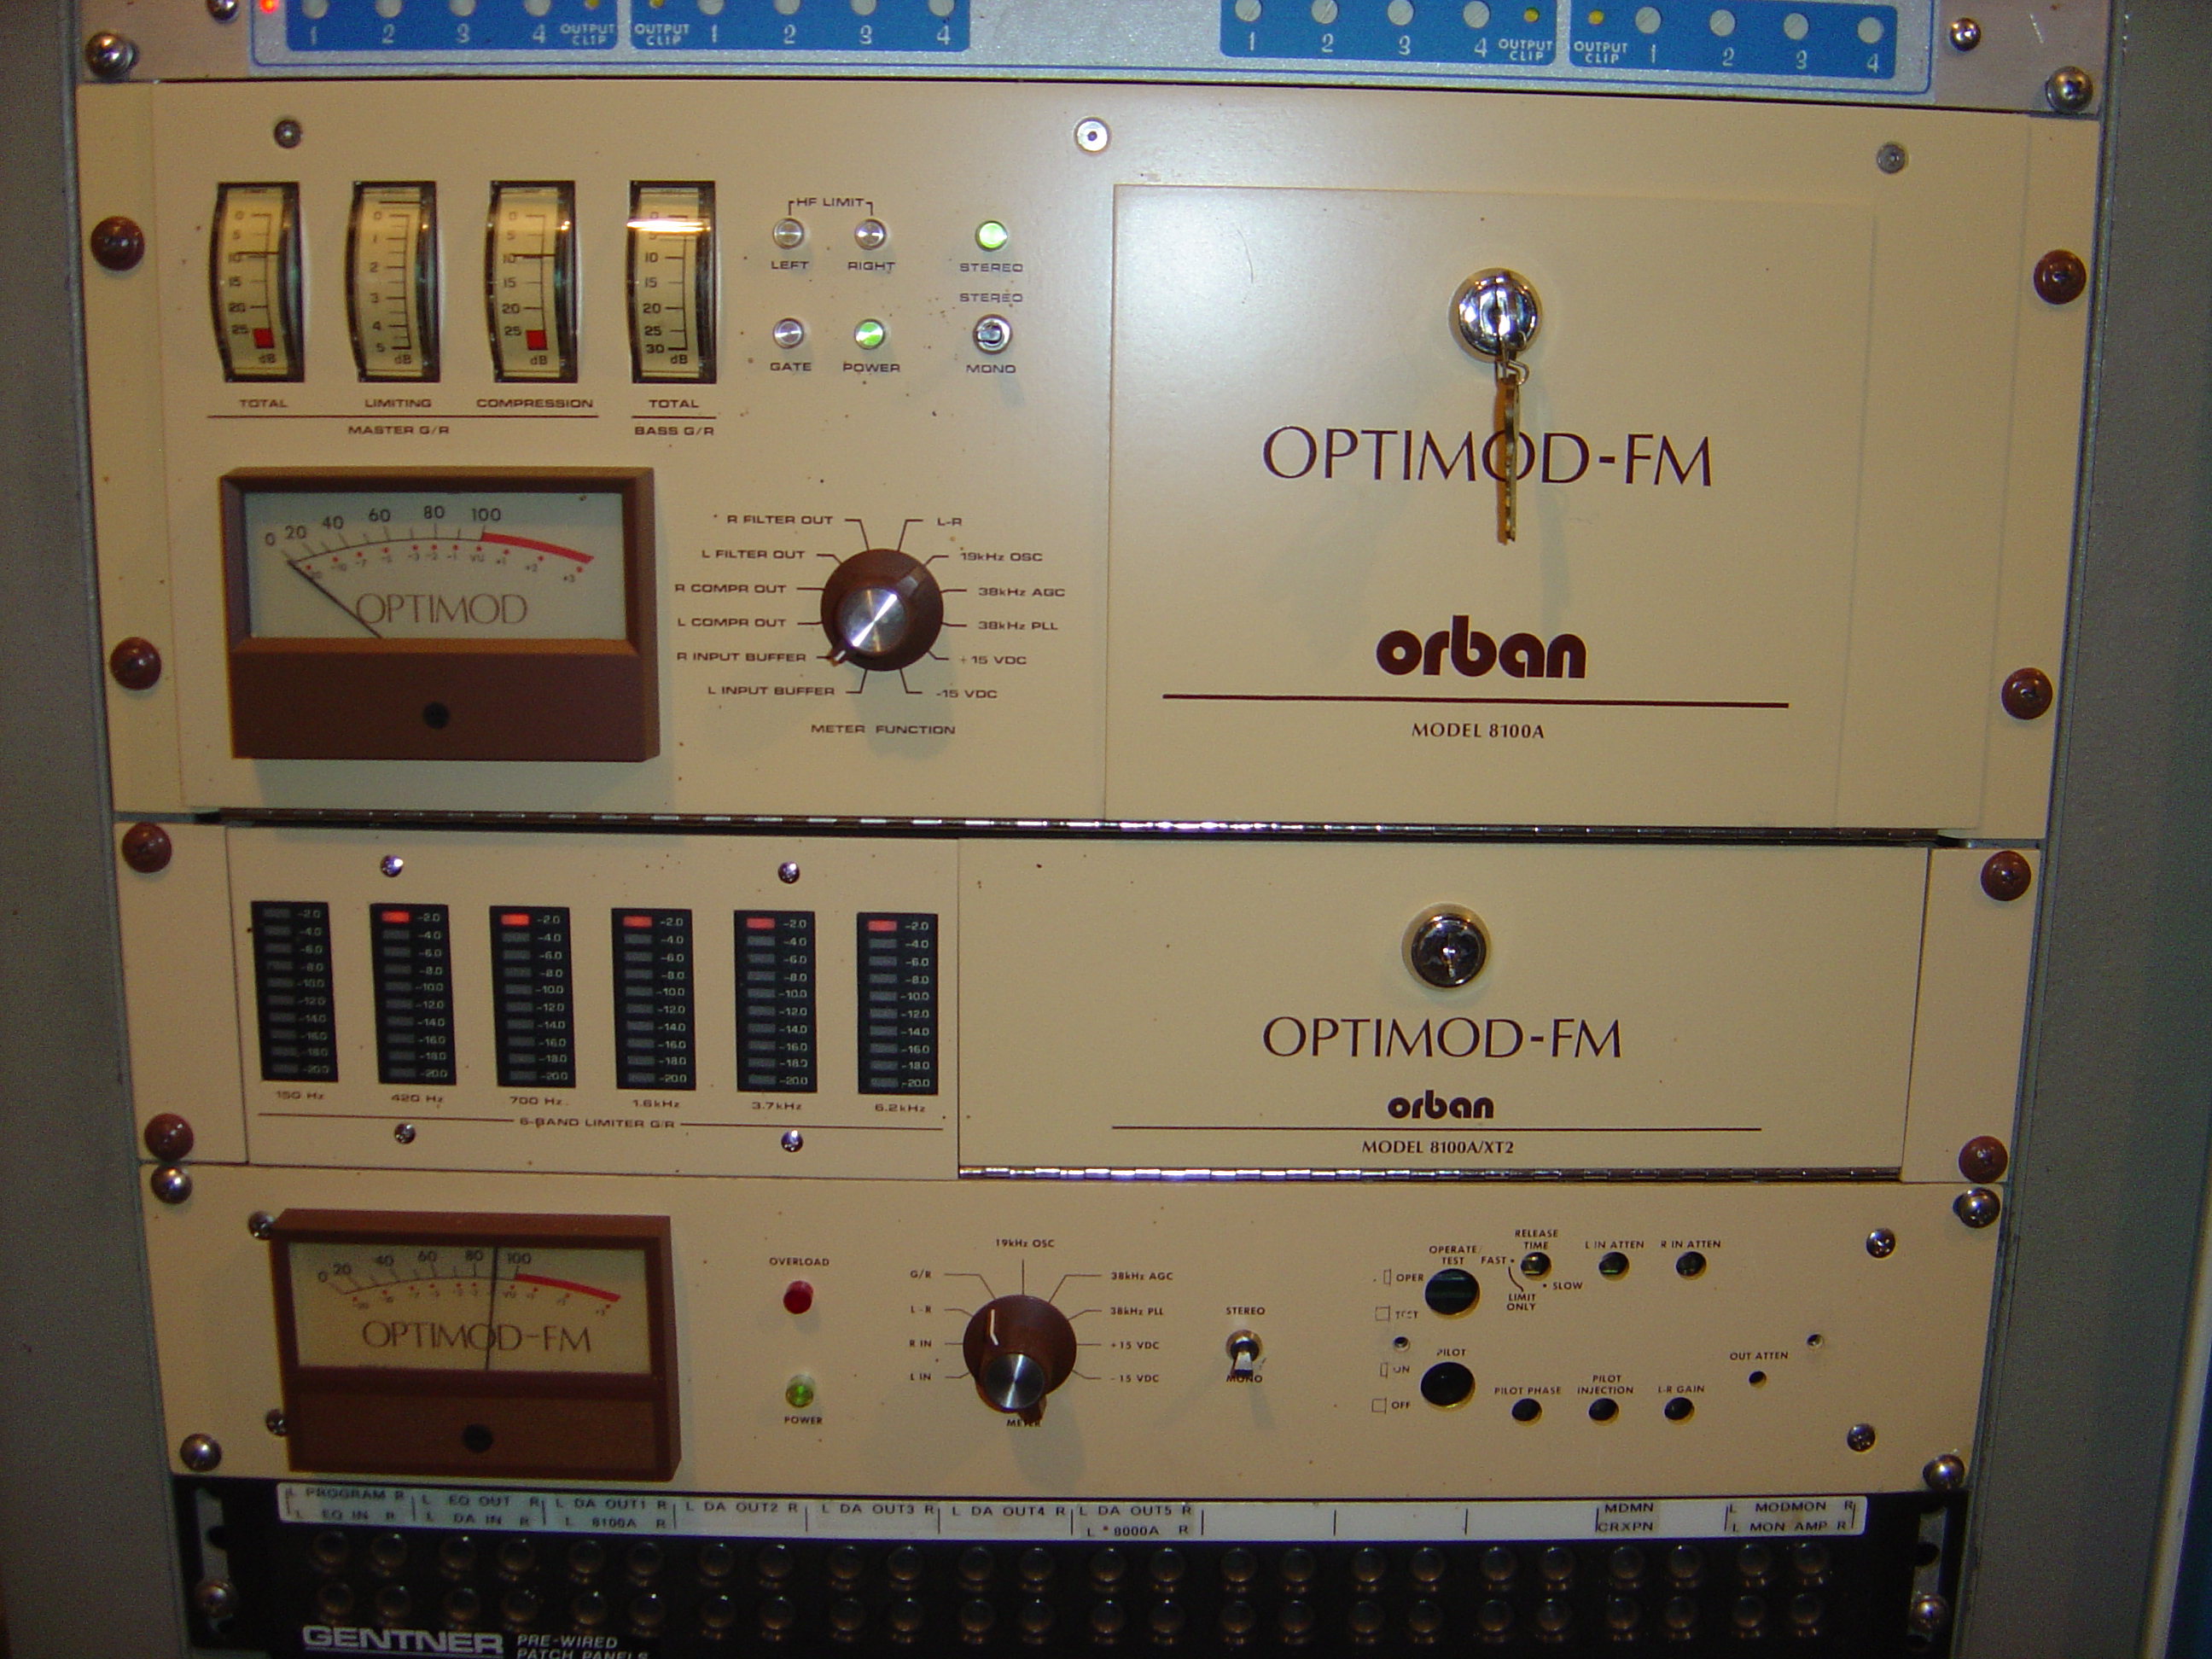 2006 - Newer Optimod on Top, the original 1980s edition on bottom. Both worked.